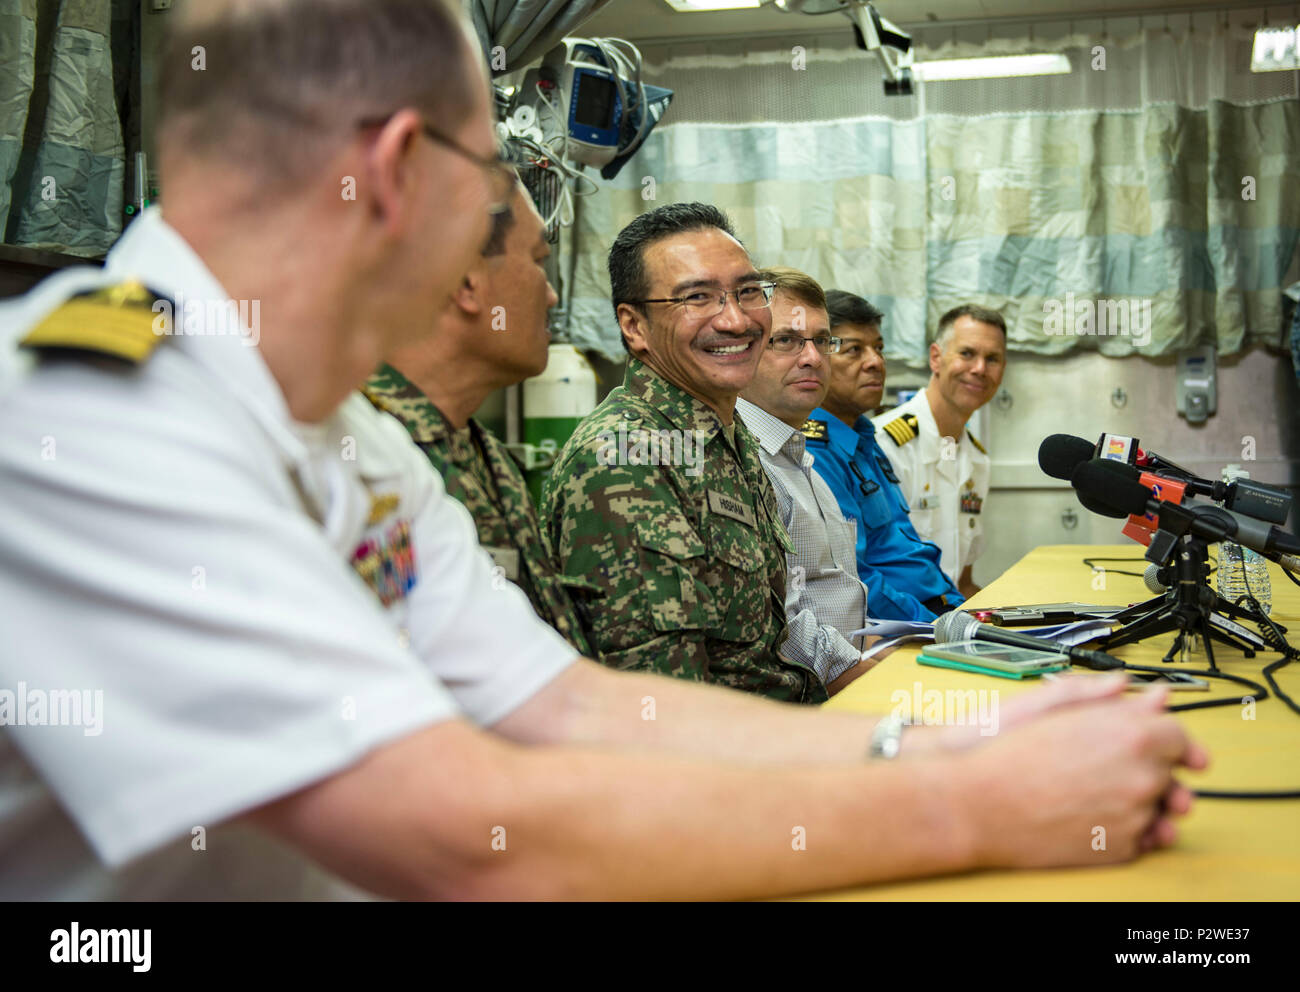 160804-N-QW941-256 KUANTAN, Malaysia (Aug 4, 2016) Dato’ Seri Hishammuddin Tun Hussein (center), Minister of Defense, Malaysia, participates in a press conference held aboard hospital ship USNS Mercy (T-AH 19). While aboard Mercy, Hishammuddin met with Pacific Partnership personnel, toured the ship and participated in a press conference. This is the first time Mercy and Pacific Partnership have visited Malaysia. During the mission stop partner nations work side-by-side with local military and civilian organizations in a search and rescue exercise, civil engineering projects, community relation Stock Photo